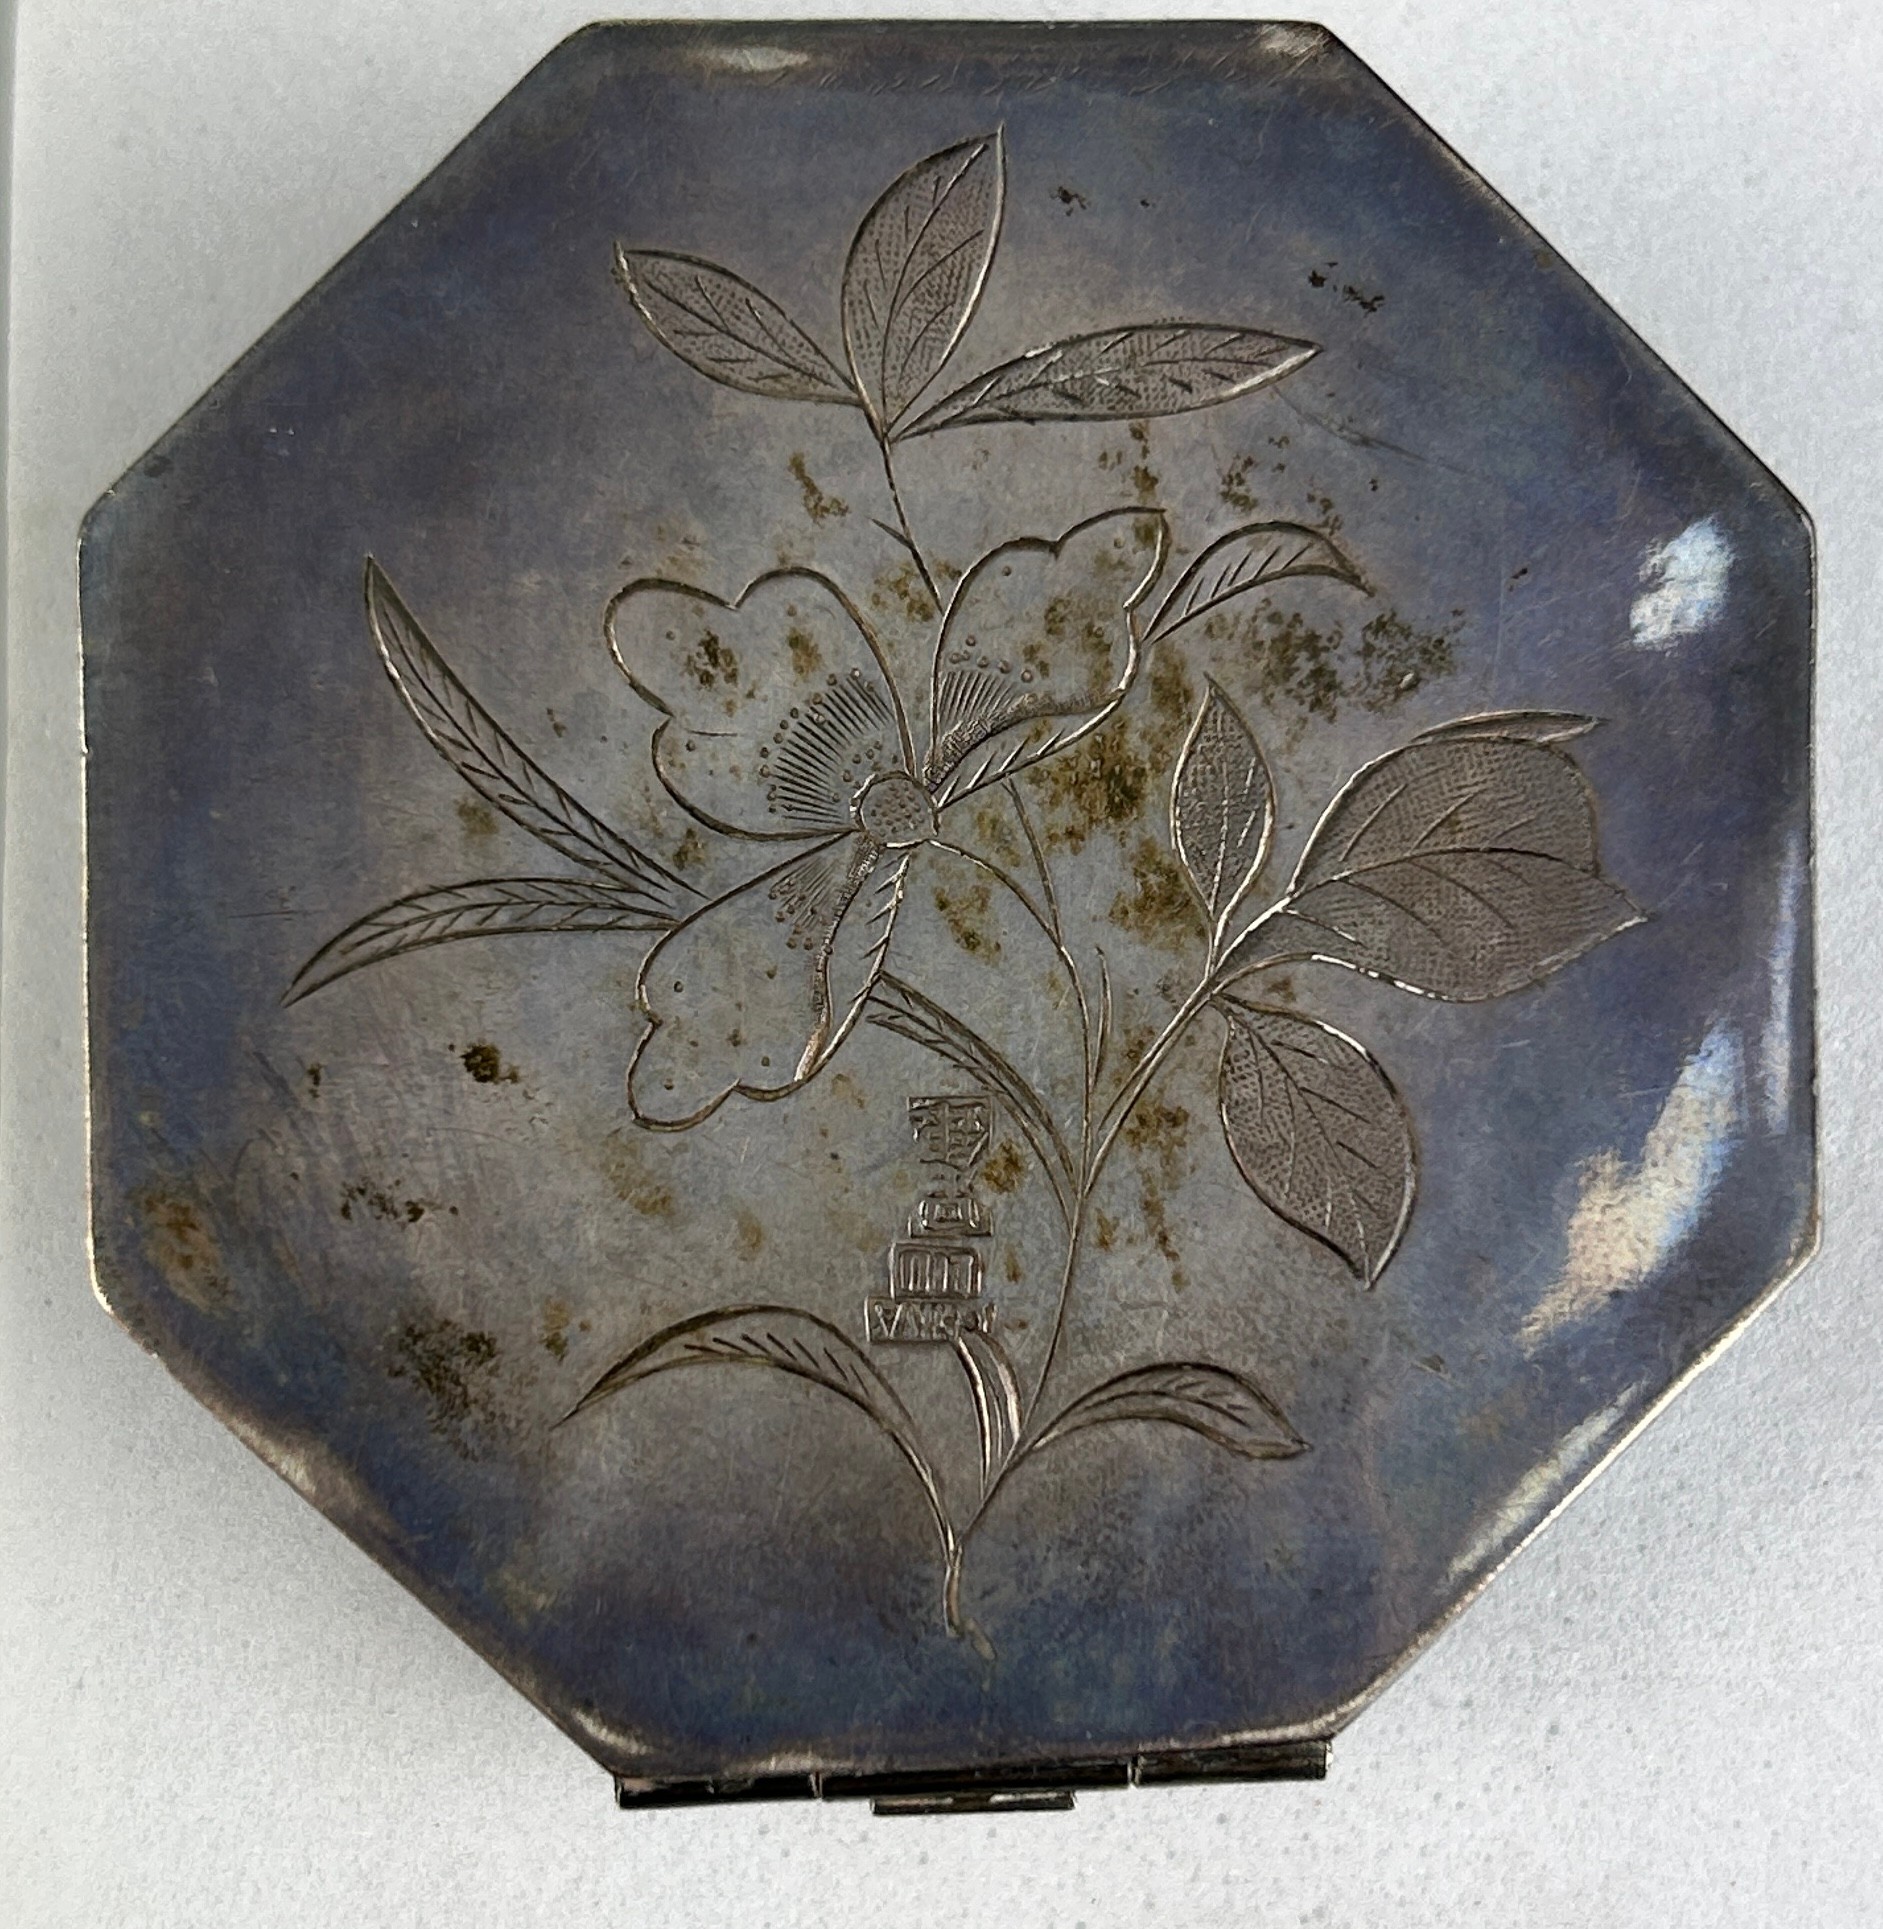 A 19TH CENTURY CHINESE RETICULATED JADE PLAQUE DEPICTING VARIOUS BATS, Mounted into a 20th century - Image 2 of 2